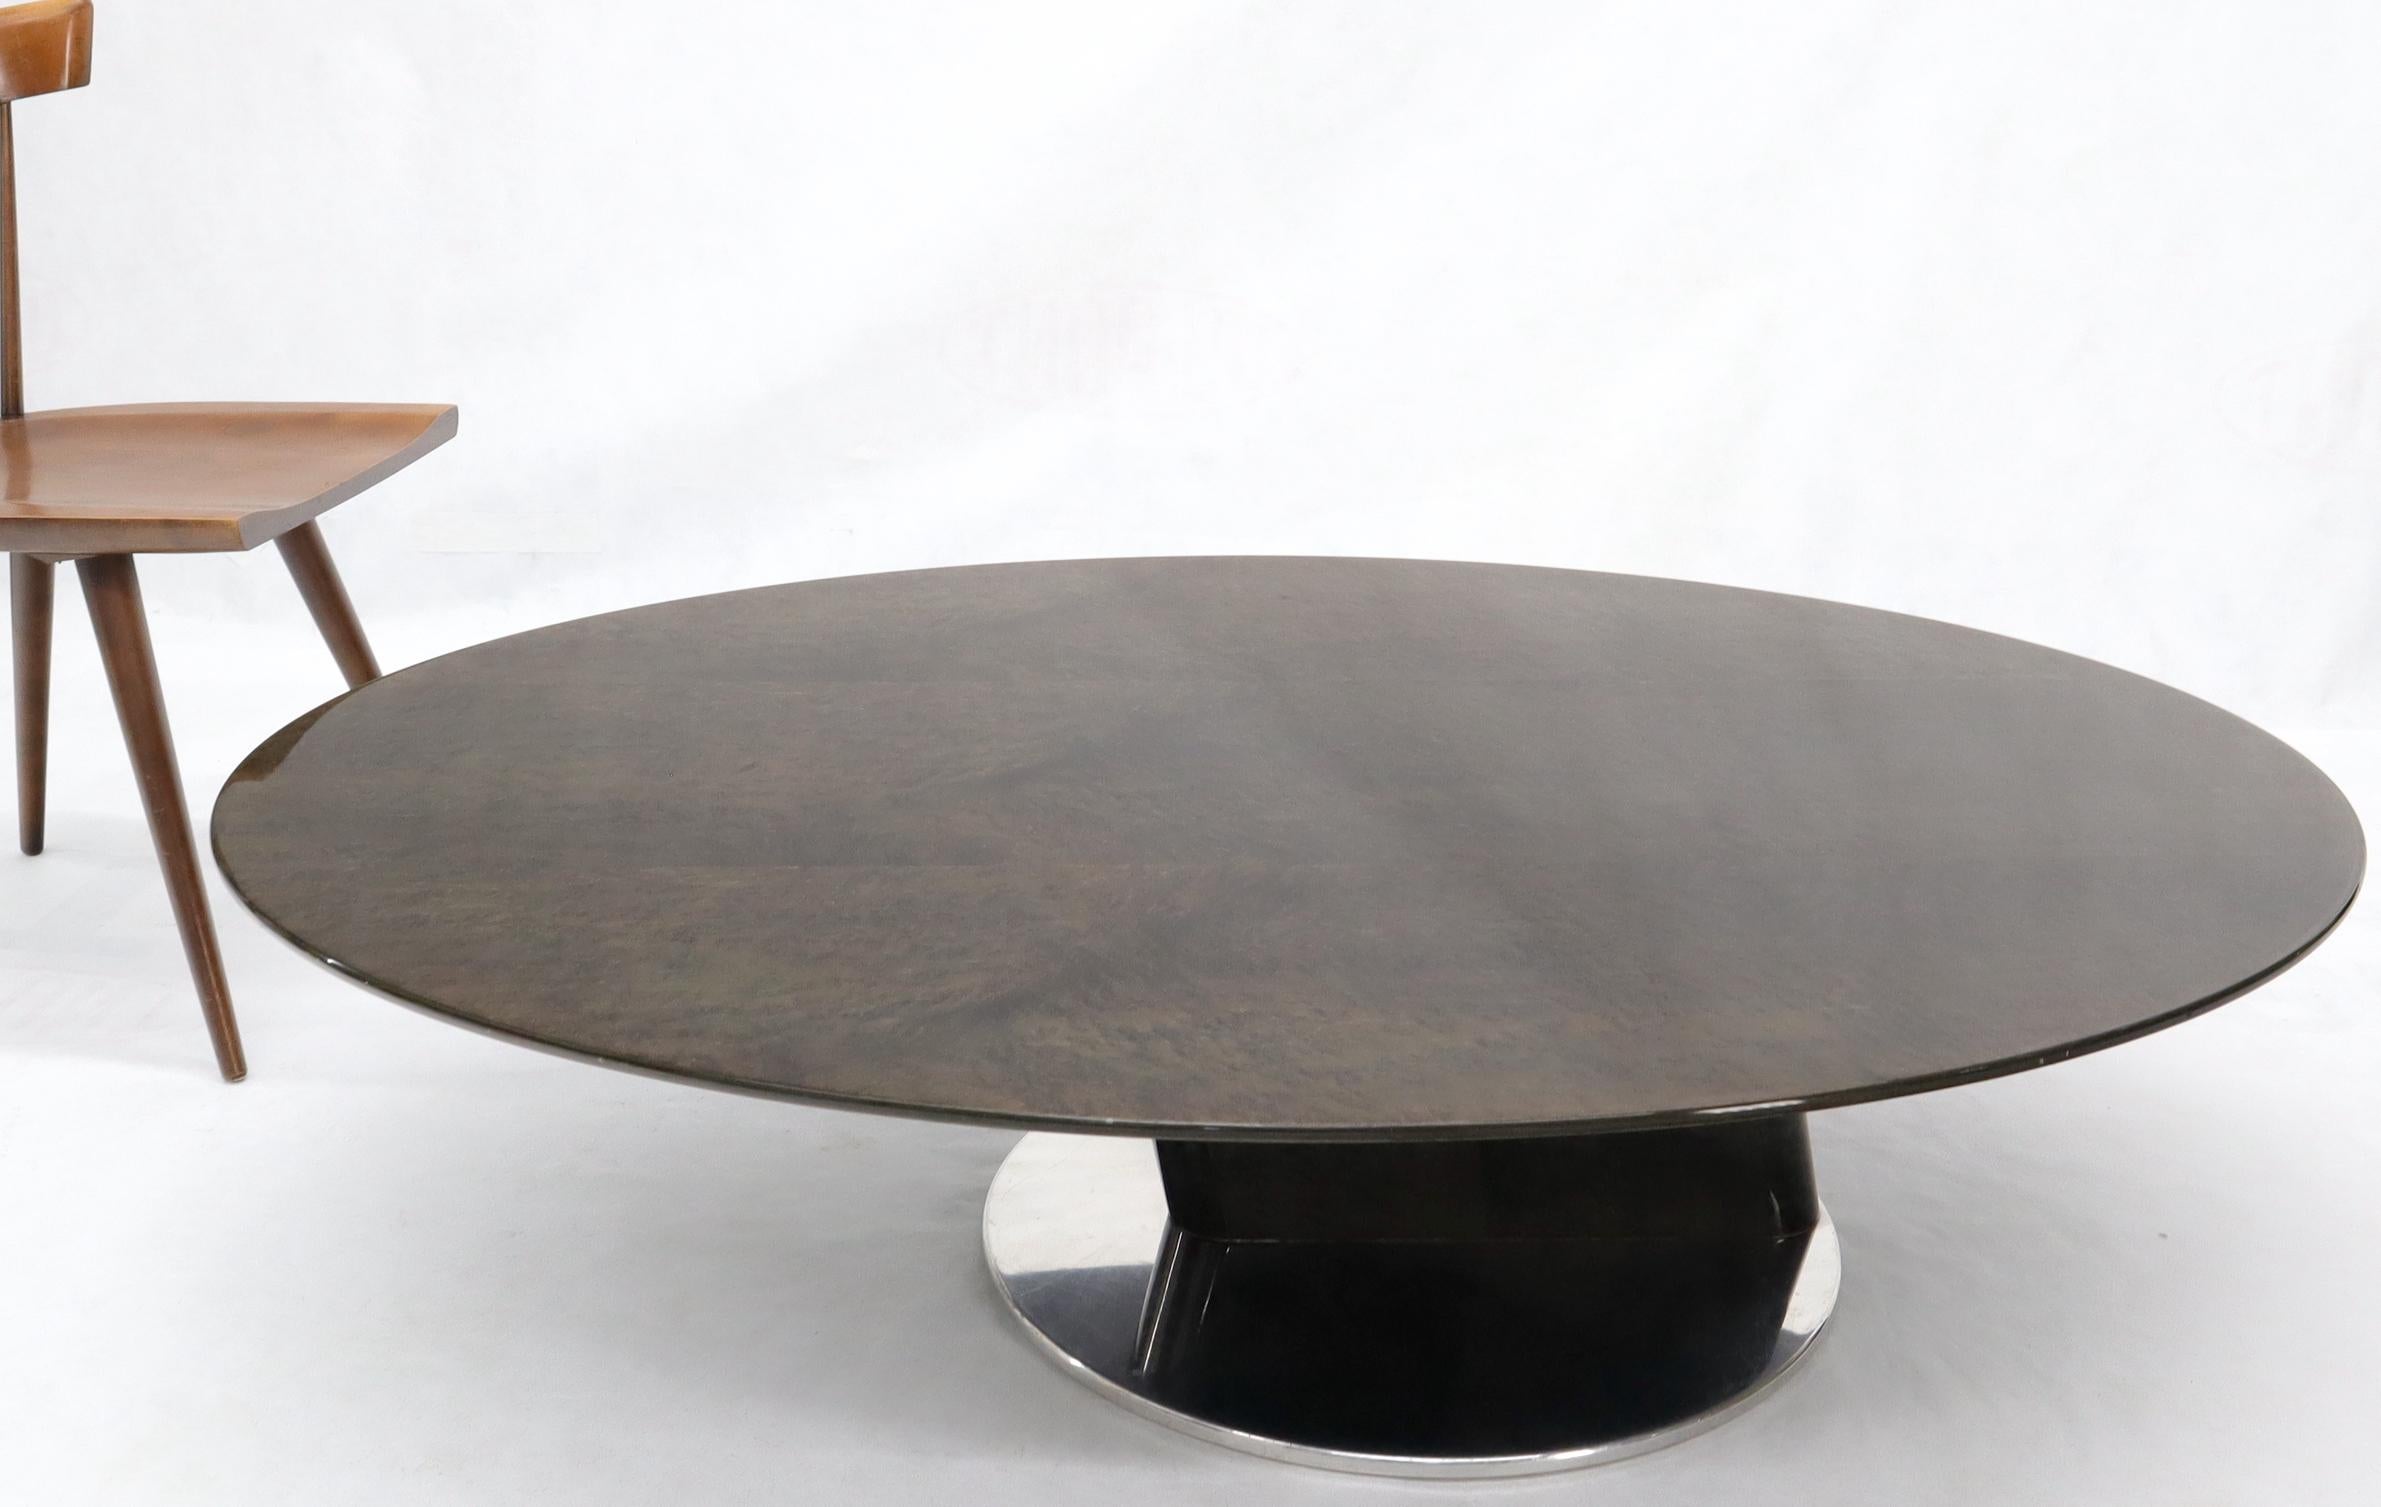 Mid-Century Modern nice oval shape ash lacquered birds-maple coffee table by Saporiti. Made in Italy.